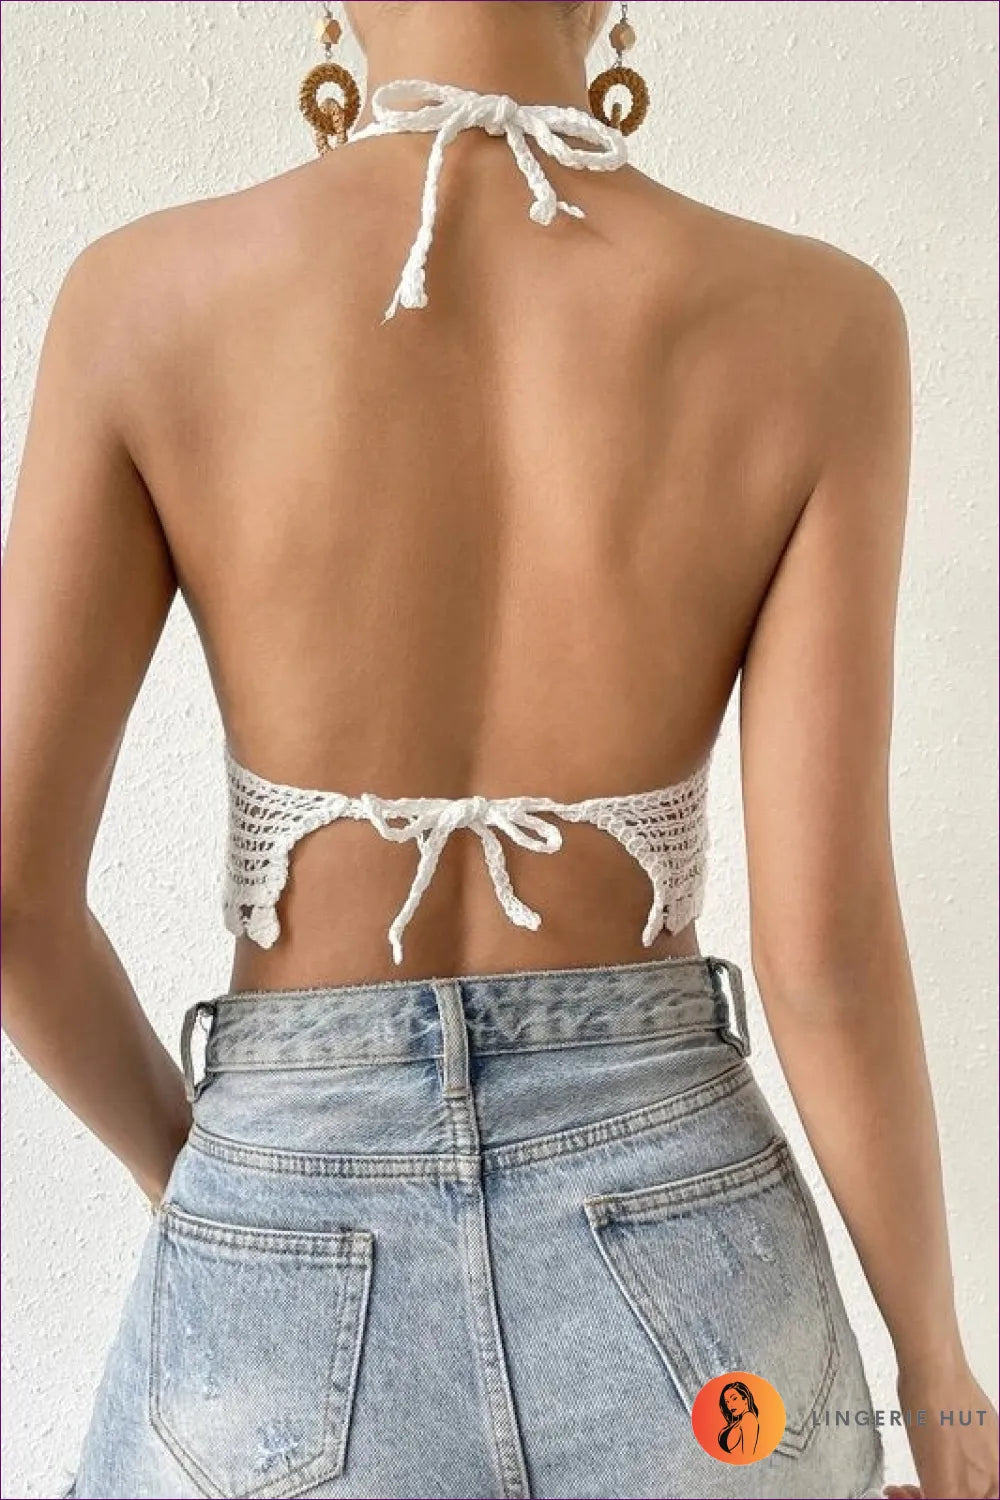 Boho Chic Meets Summer Ease With Lingerie Hut’s Crocheted Hollow Sling Back Strap Top. Halter, Tie-up,